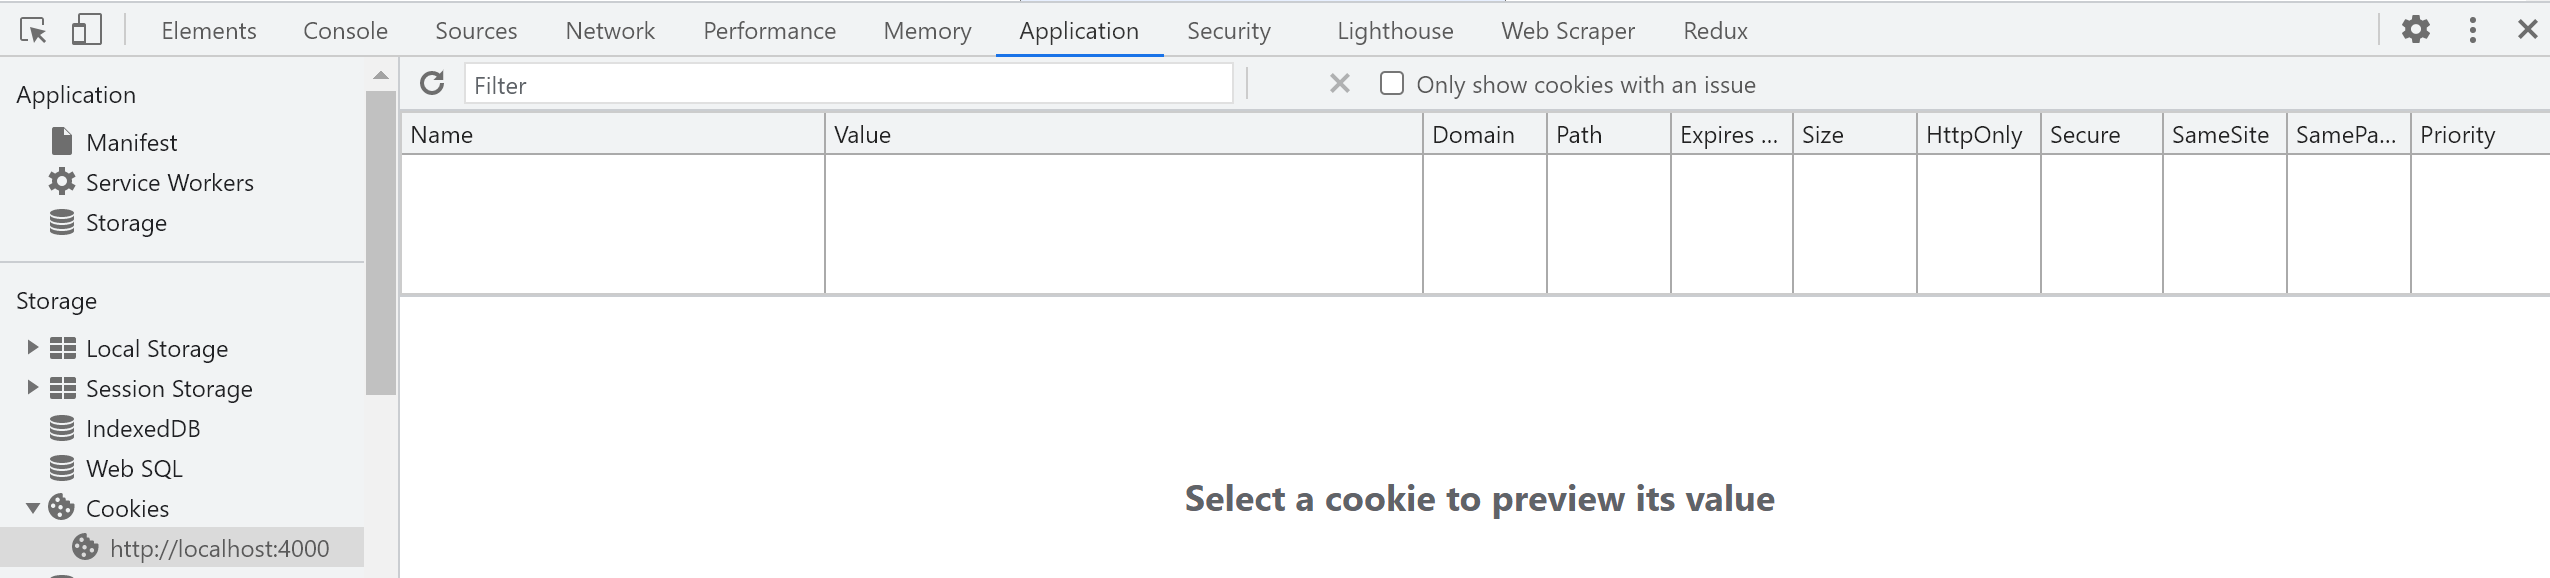 Logout clear cookies